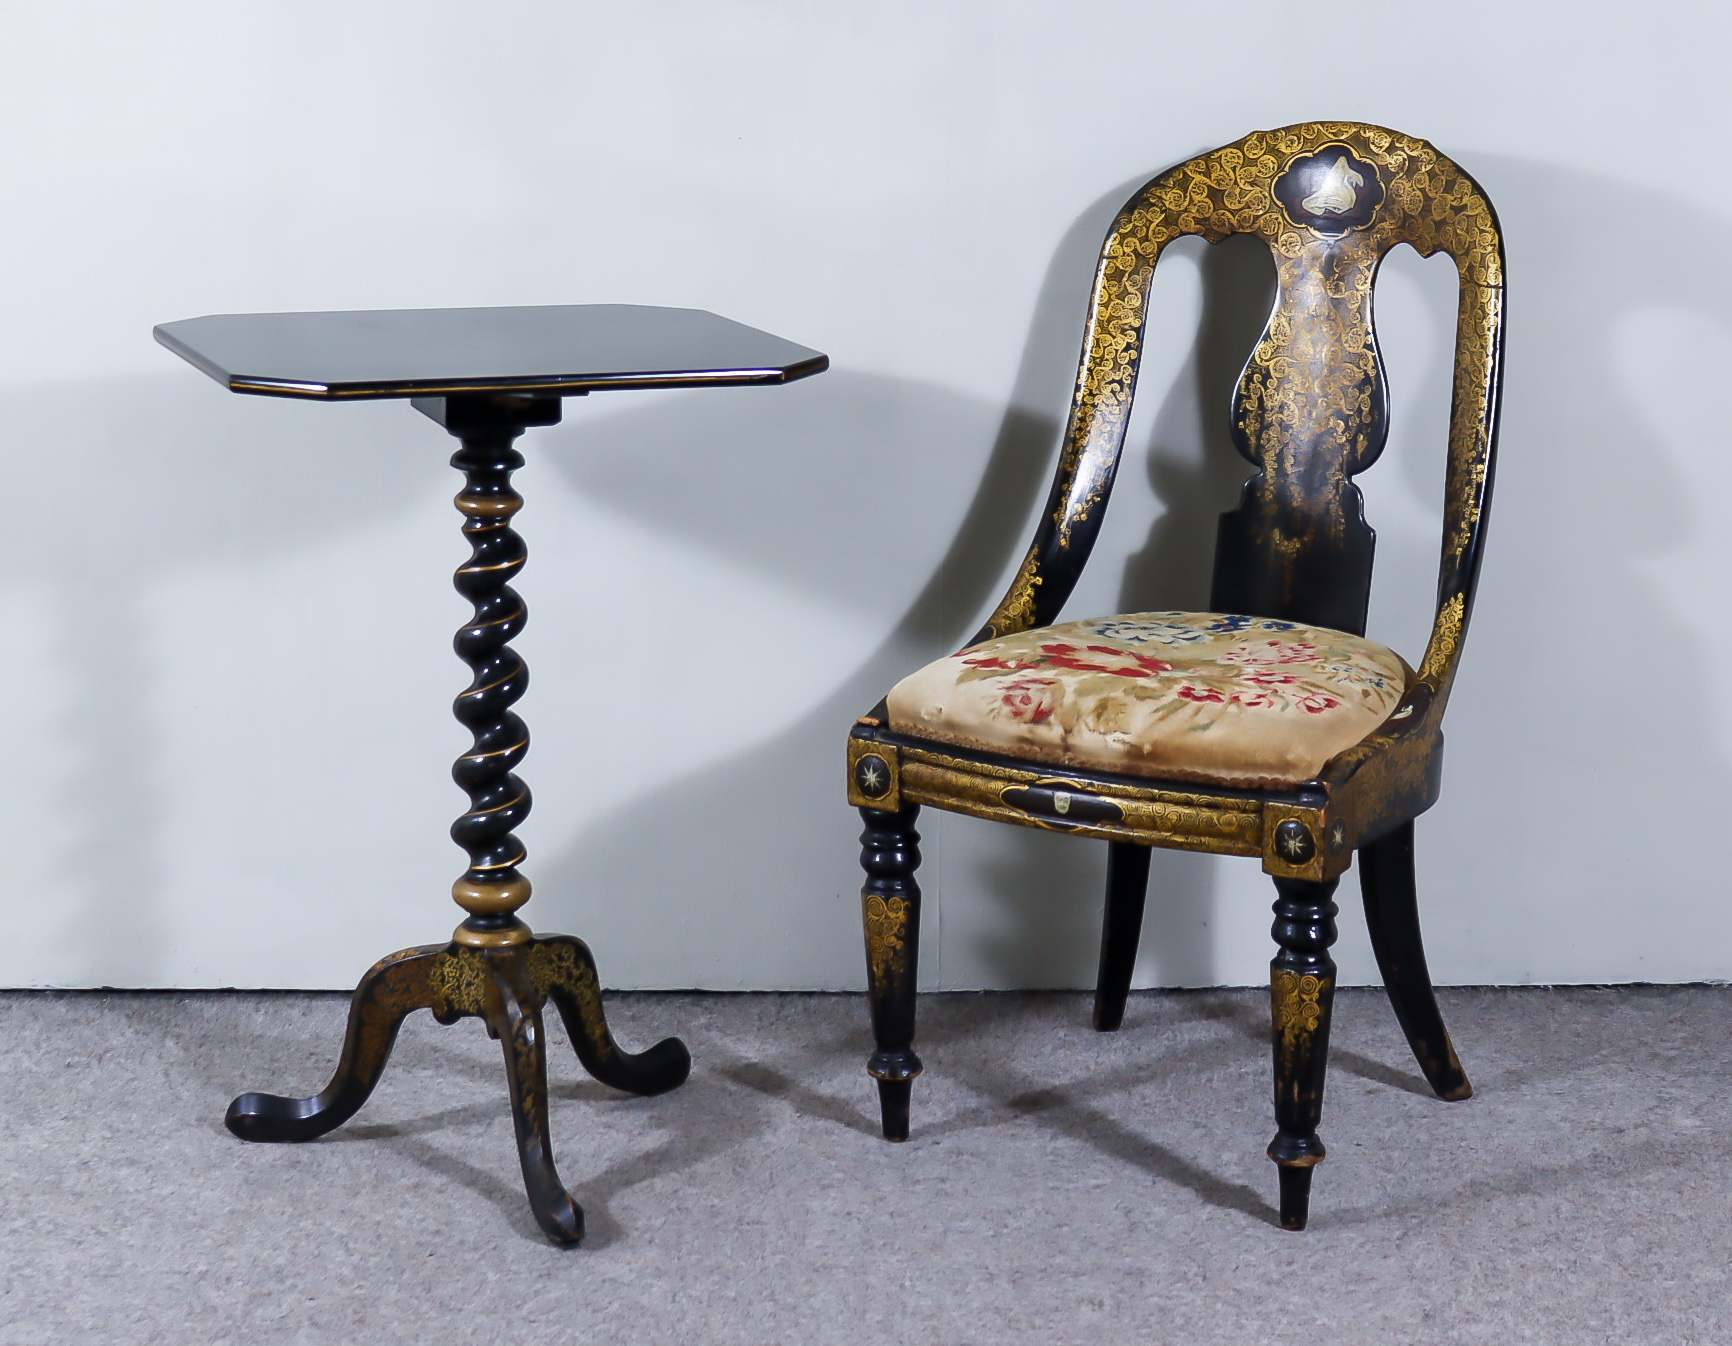 An Early 19th Century Black Lacquer and Gilt Tilt Top Octagonal Occasional Table, on spiral turned